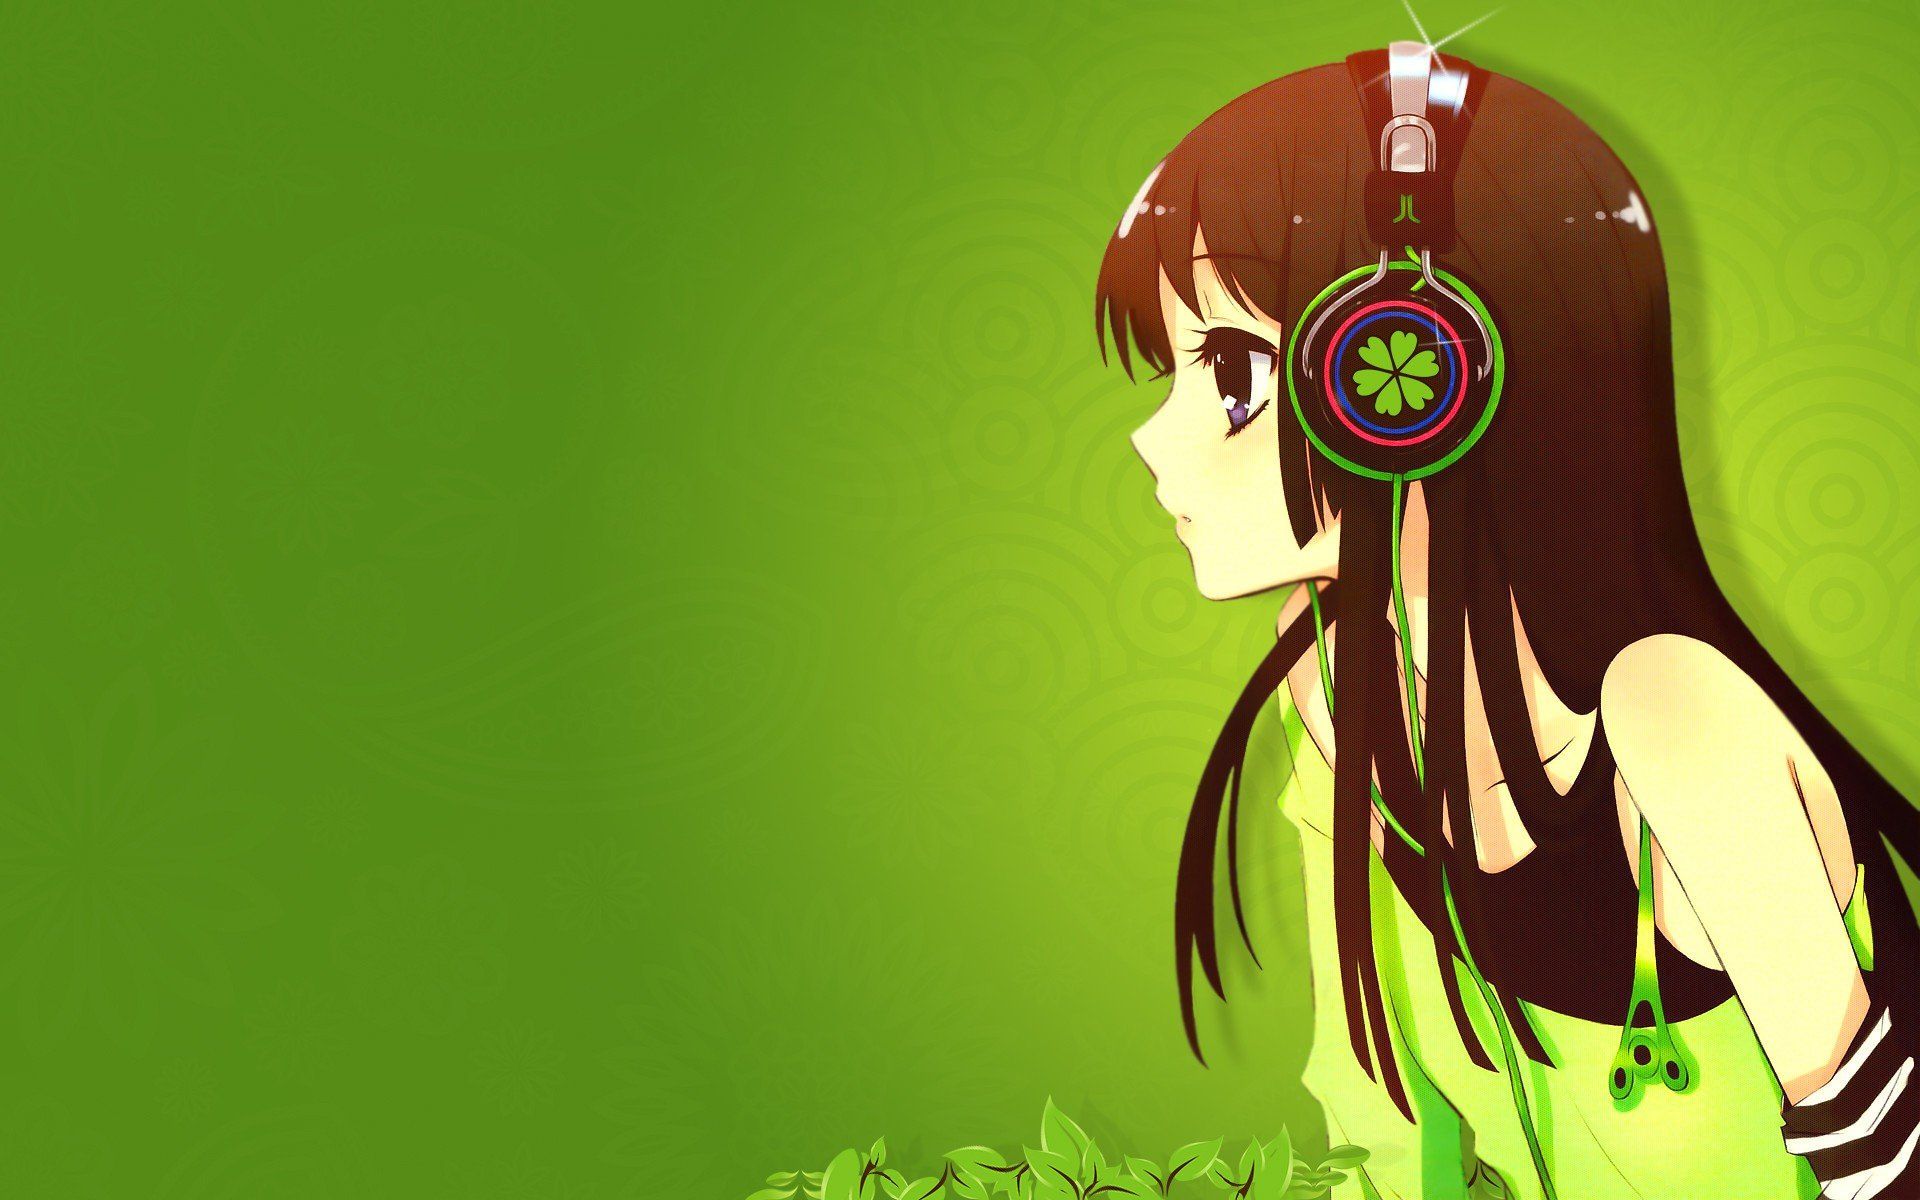 Best 38+ Green Anime Wallpapers on HipWallpapers